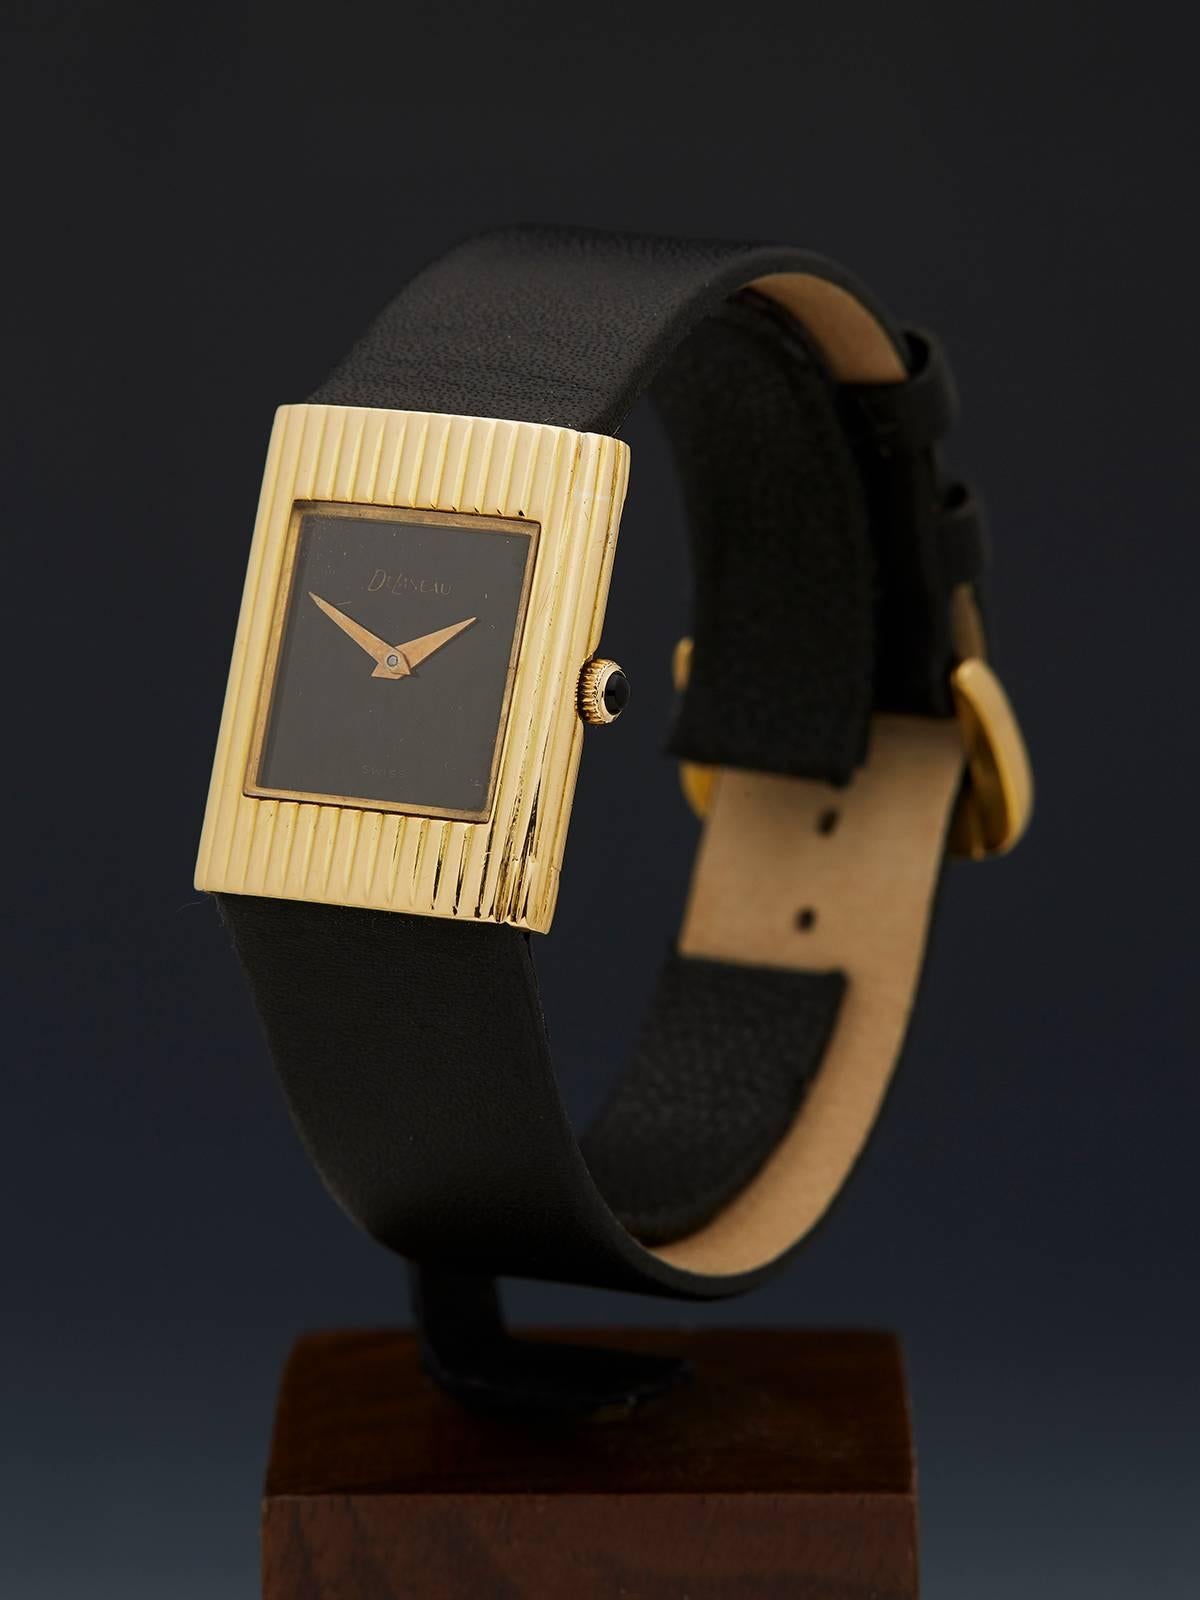 
Ref: COM430
Serial Number: G7 ****
Condition: 9 - Excellent condition
Age: 1960's
Case Size: 22mm
Box And Papers: Xupes Presentation Pouch
Movement: Manual
Case: 18k yellow gold
Dial: Black Onyx
Strap Length: Adjustable up to 18cm
Strap Width: At